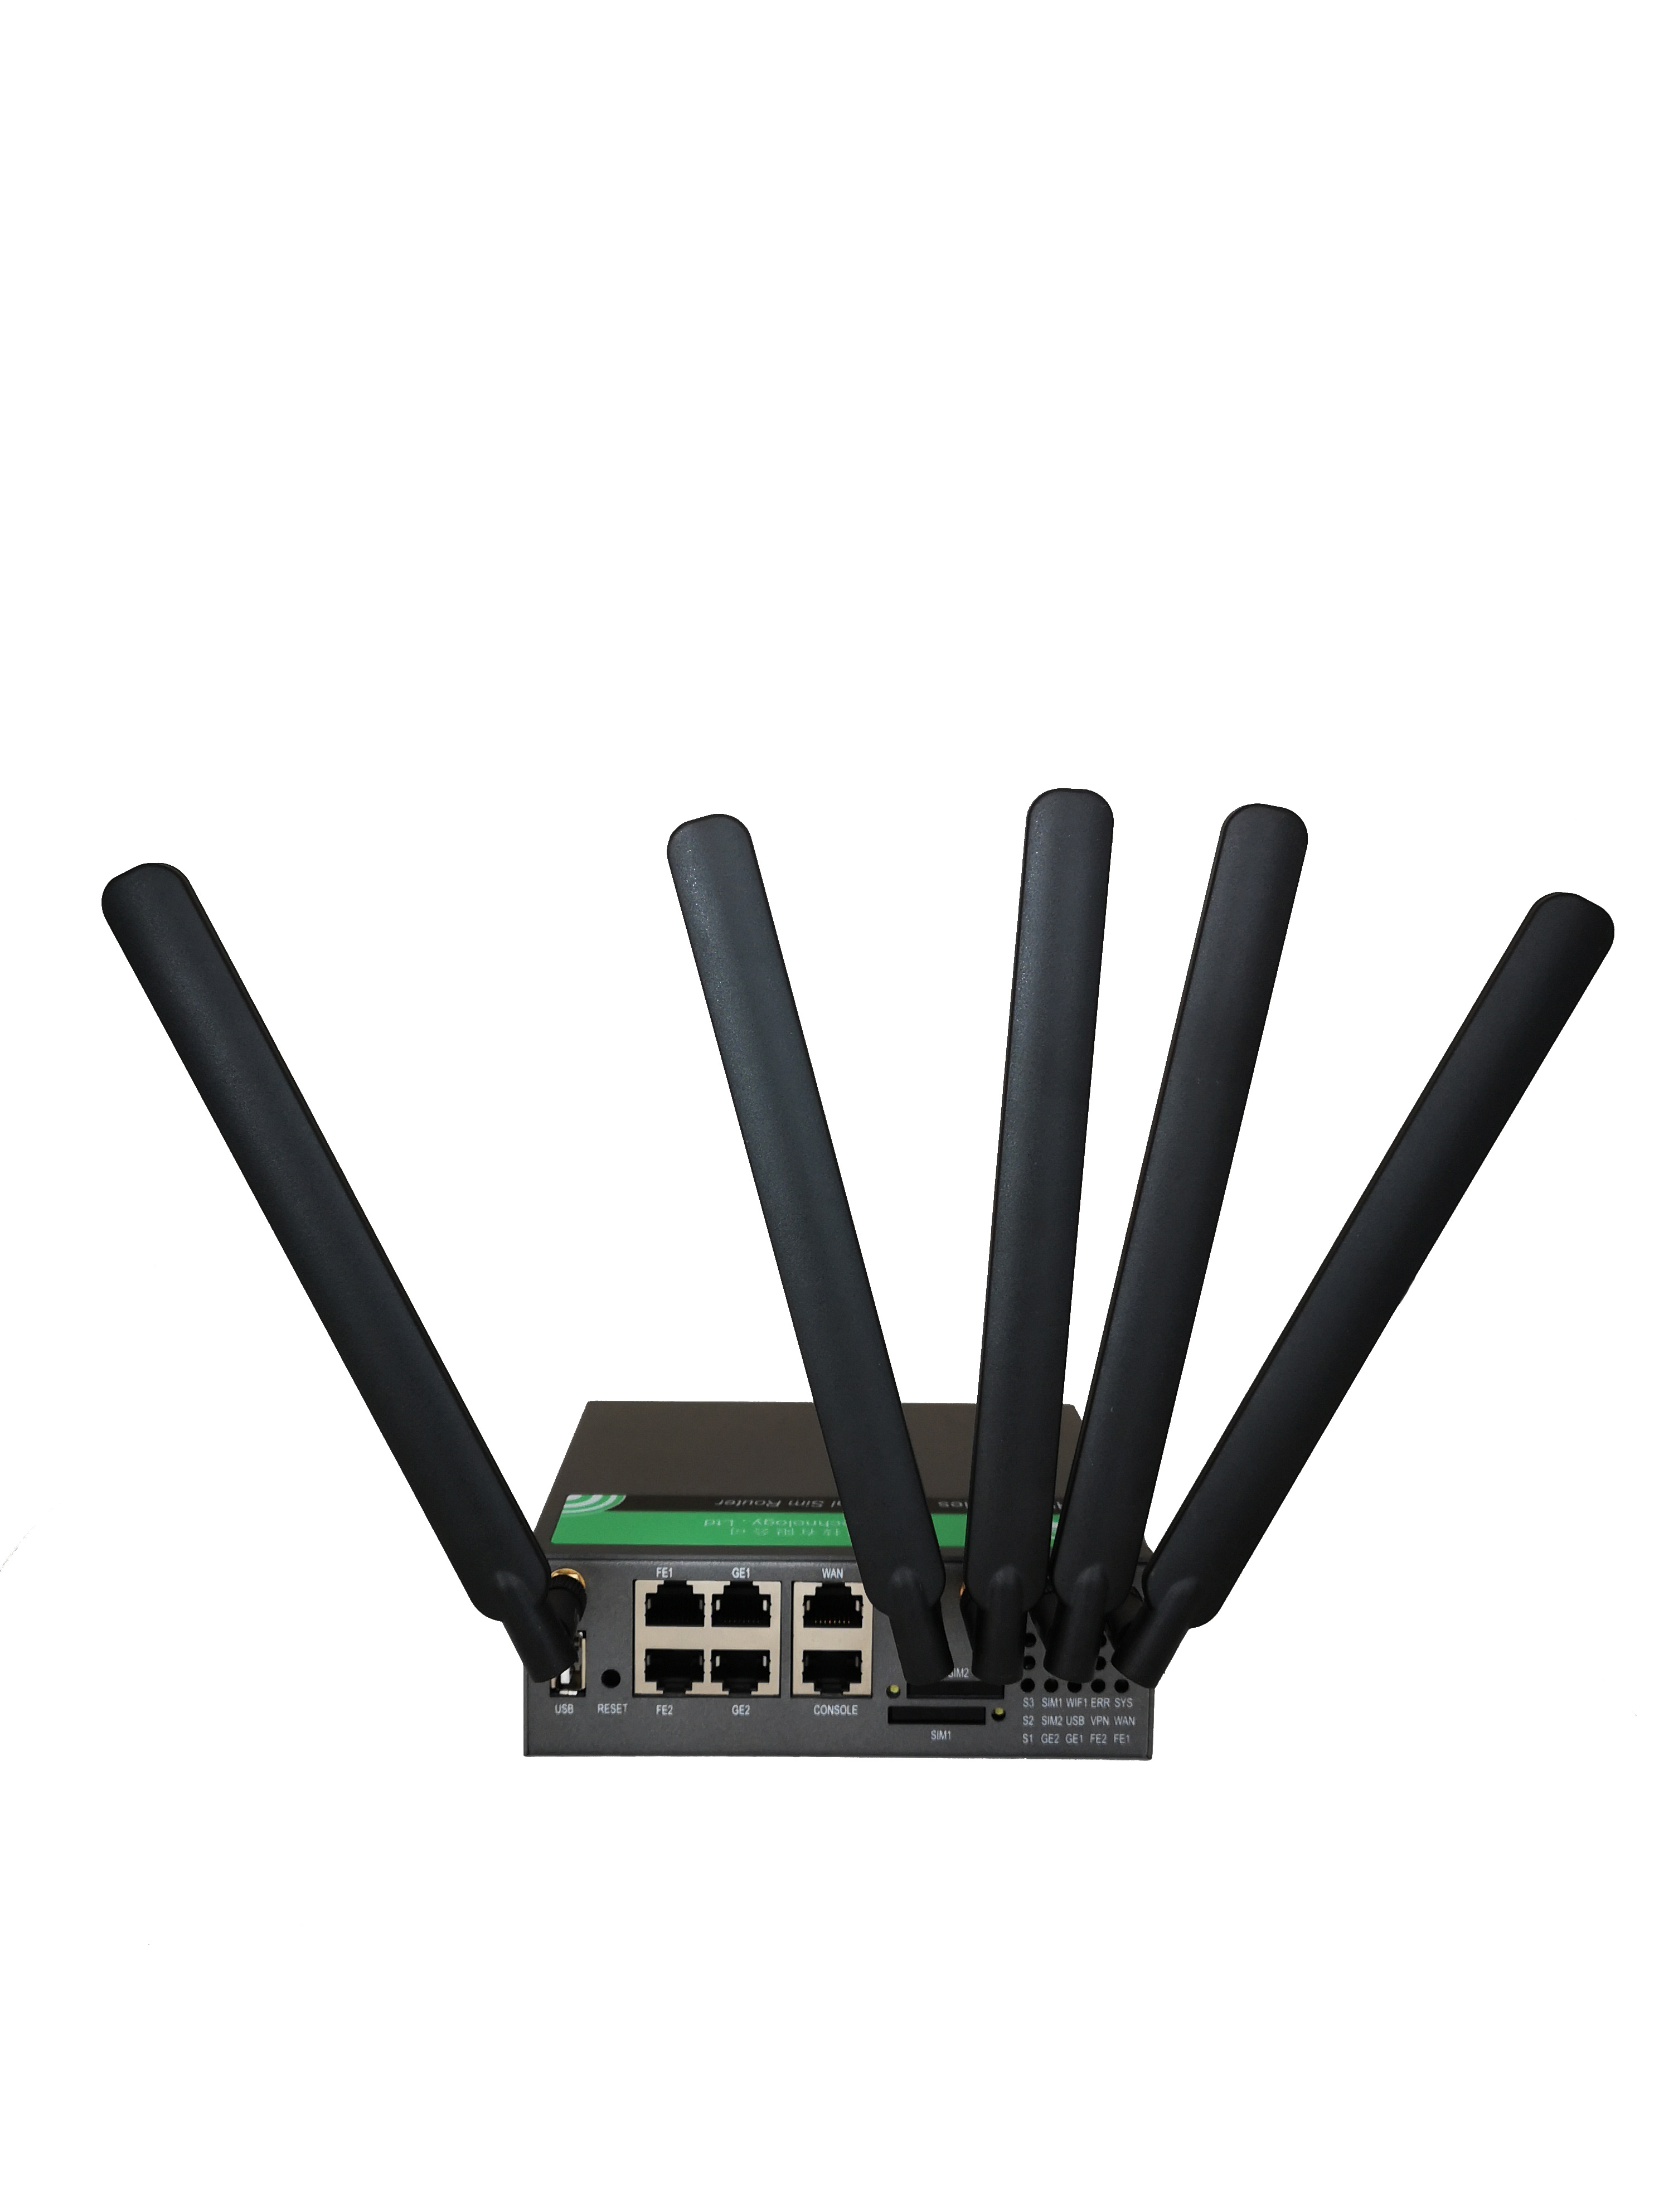 Industrial 5G Cellular Router with Dual SIM Card Slot,5G WiFi Modem Router  with External Detachable Antennas,Gigabit Ethernet,RS232/RS485 M2M IoT